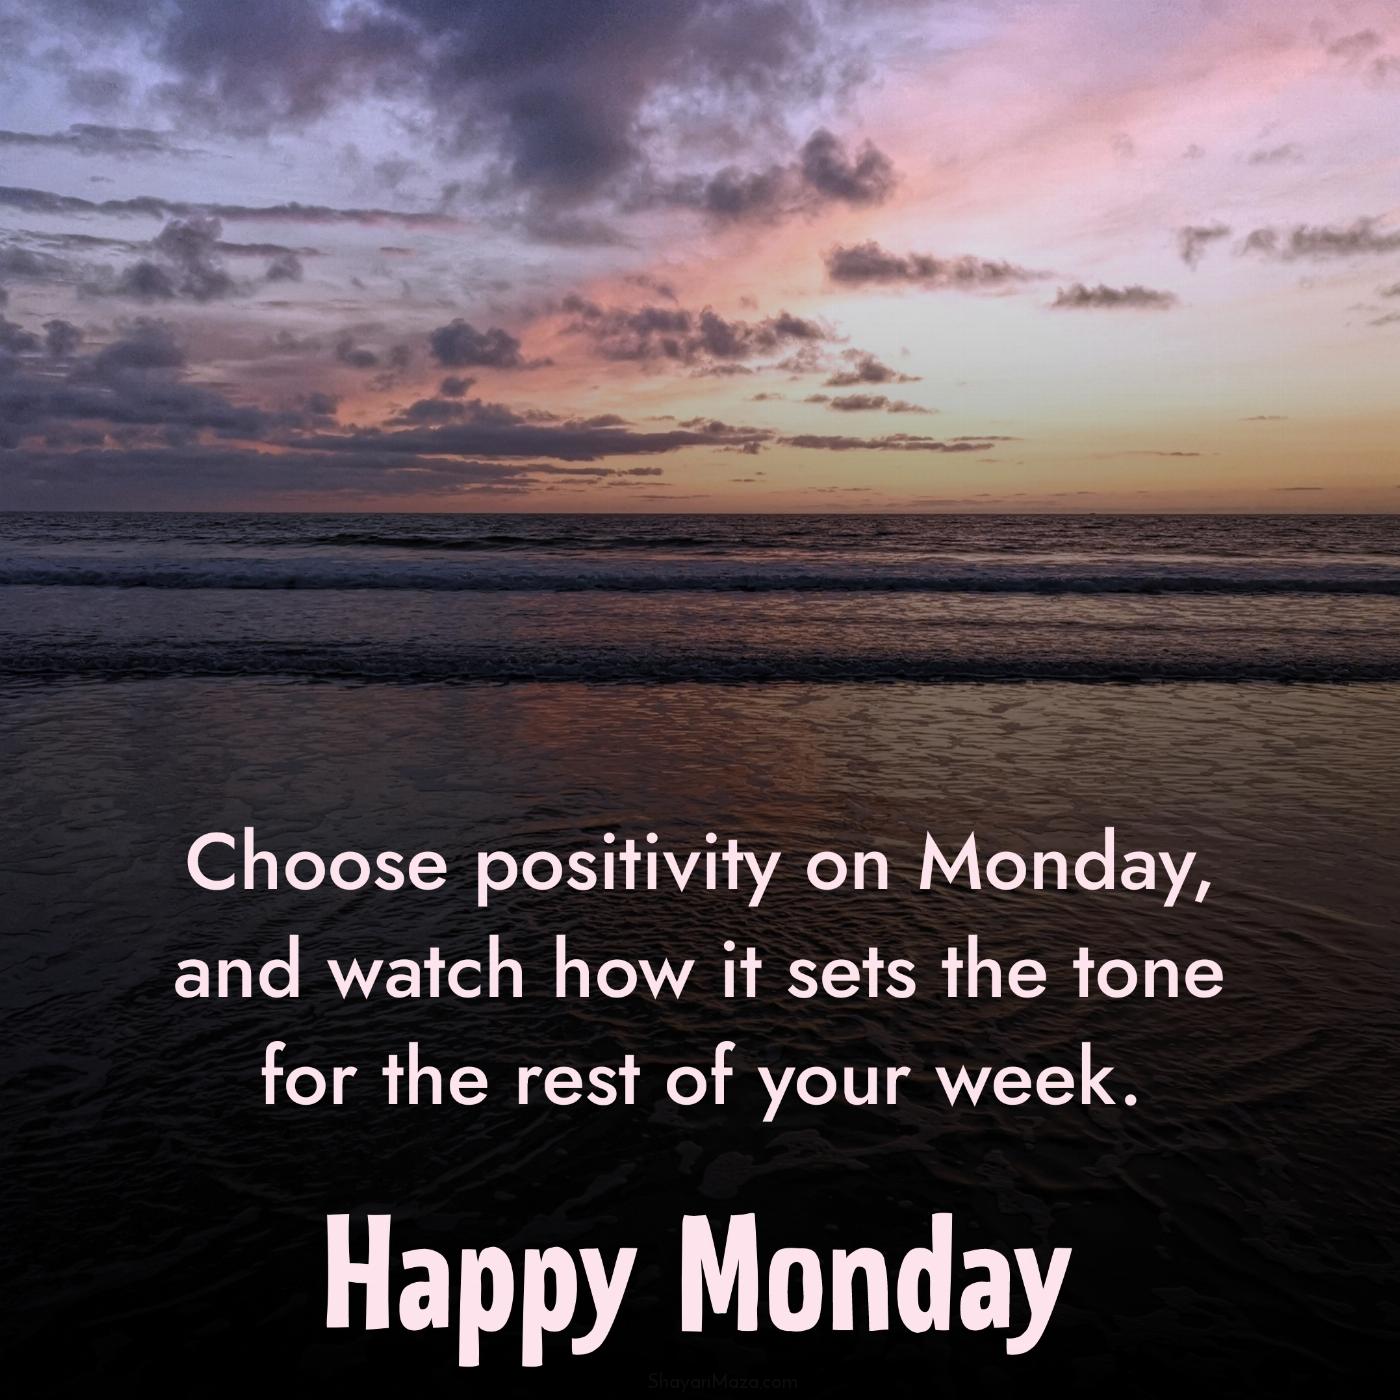 Choose positivity on Monday and watch how it sets the tone